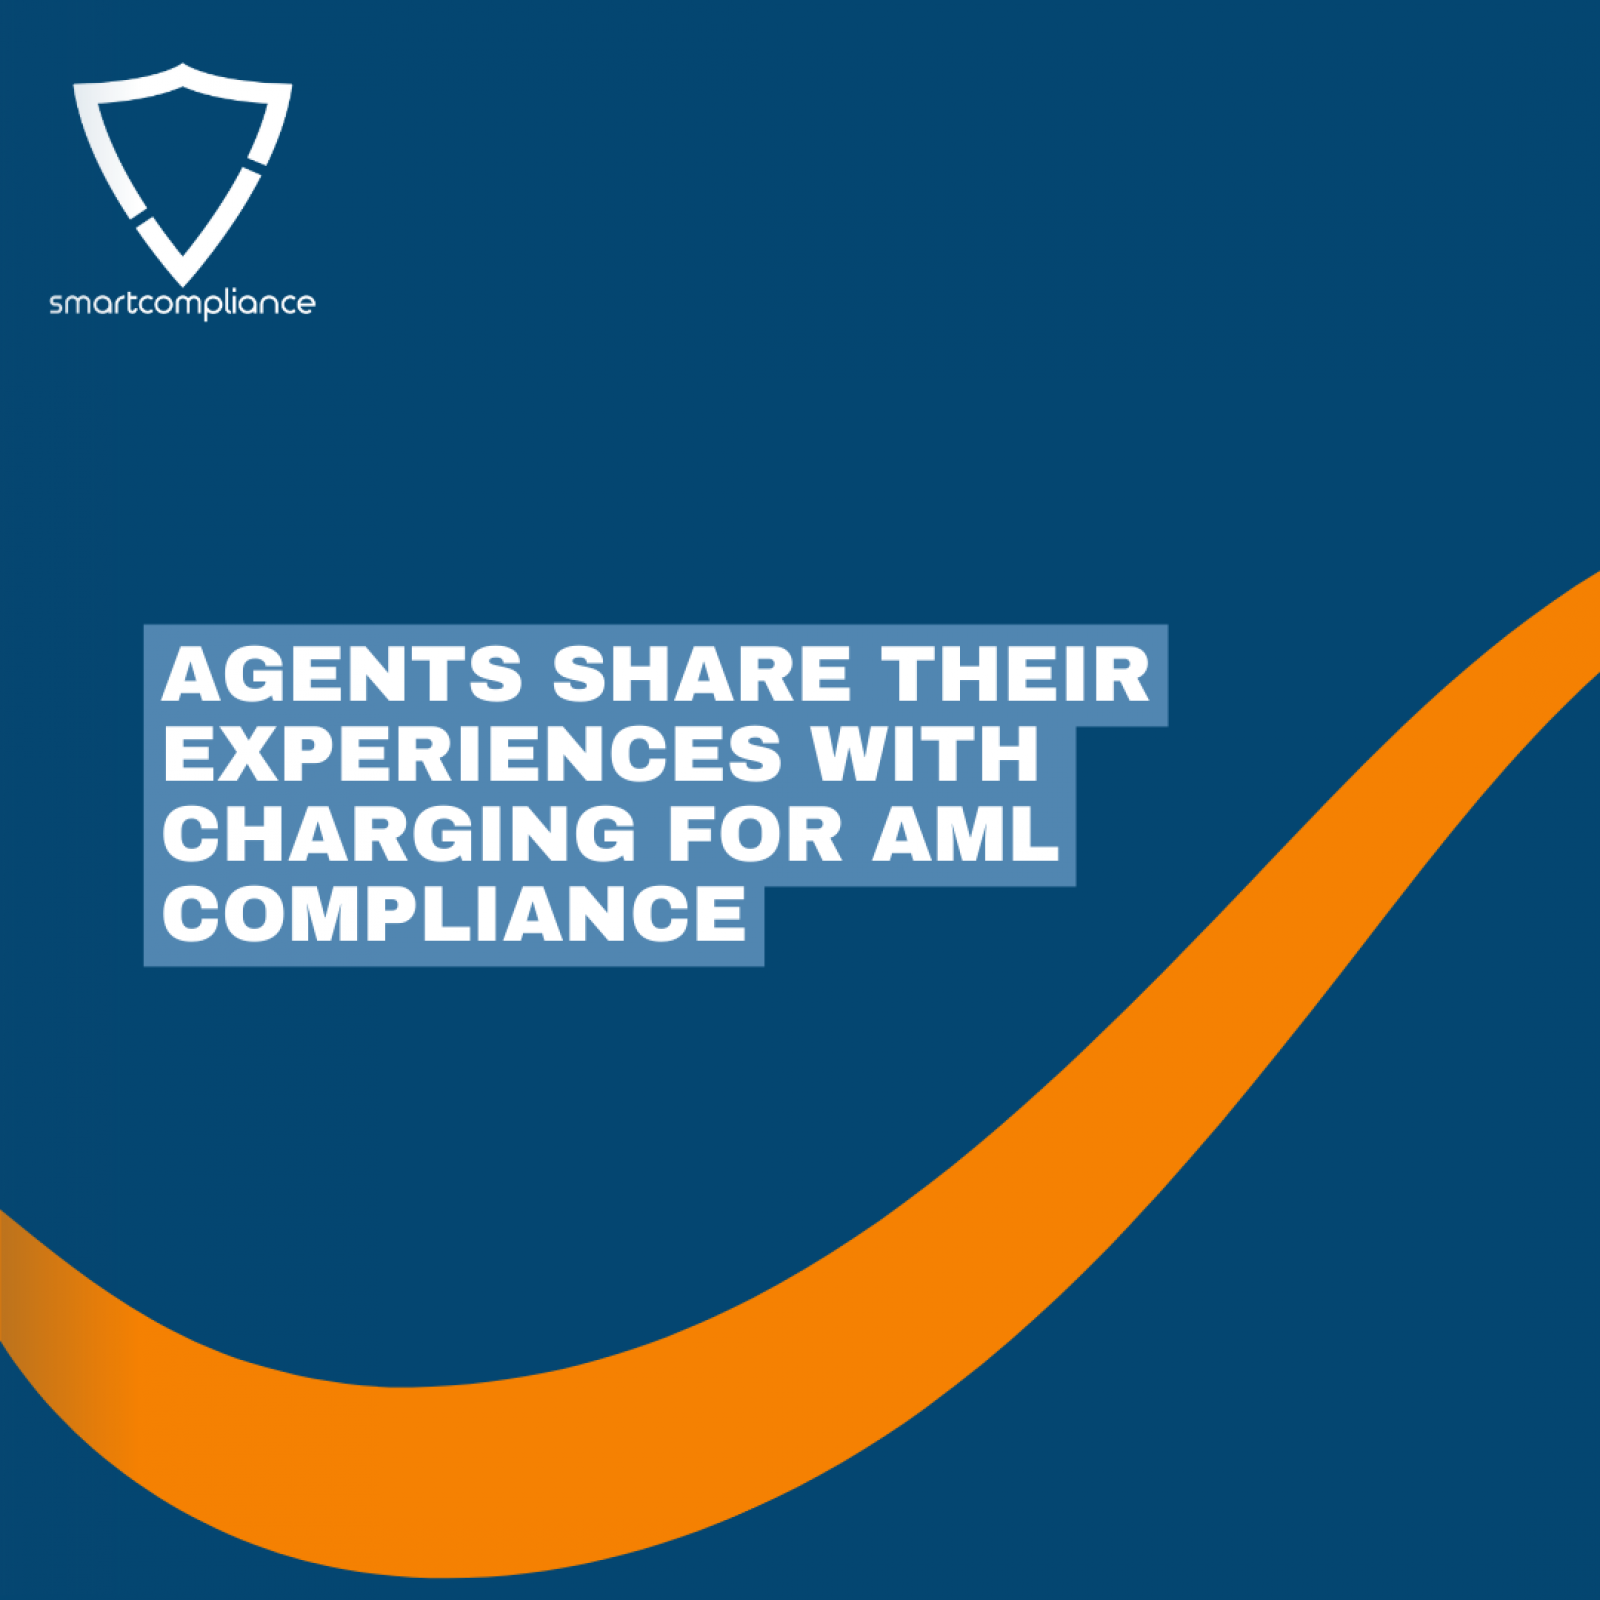 Agents Share Their Experiences with Charging for AML Compliance